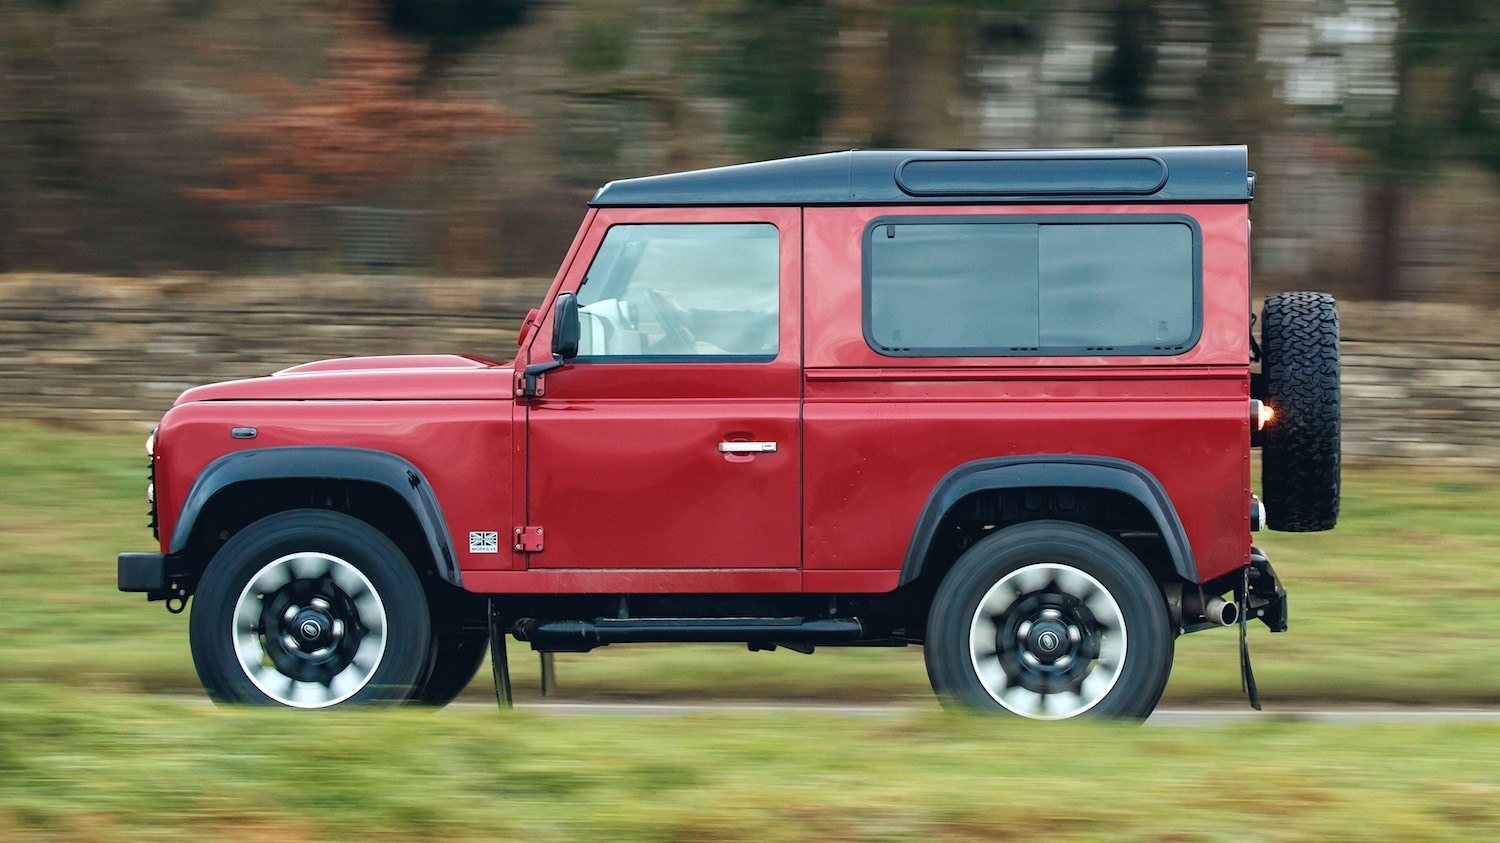 The latest 70th Edition Defender for the JPR 2018 70th Anniversary Celebrations 7